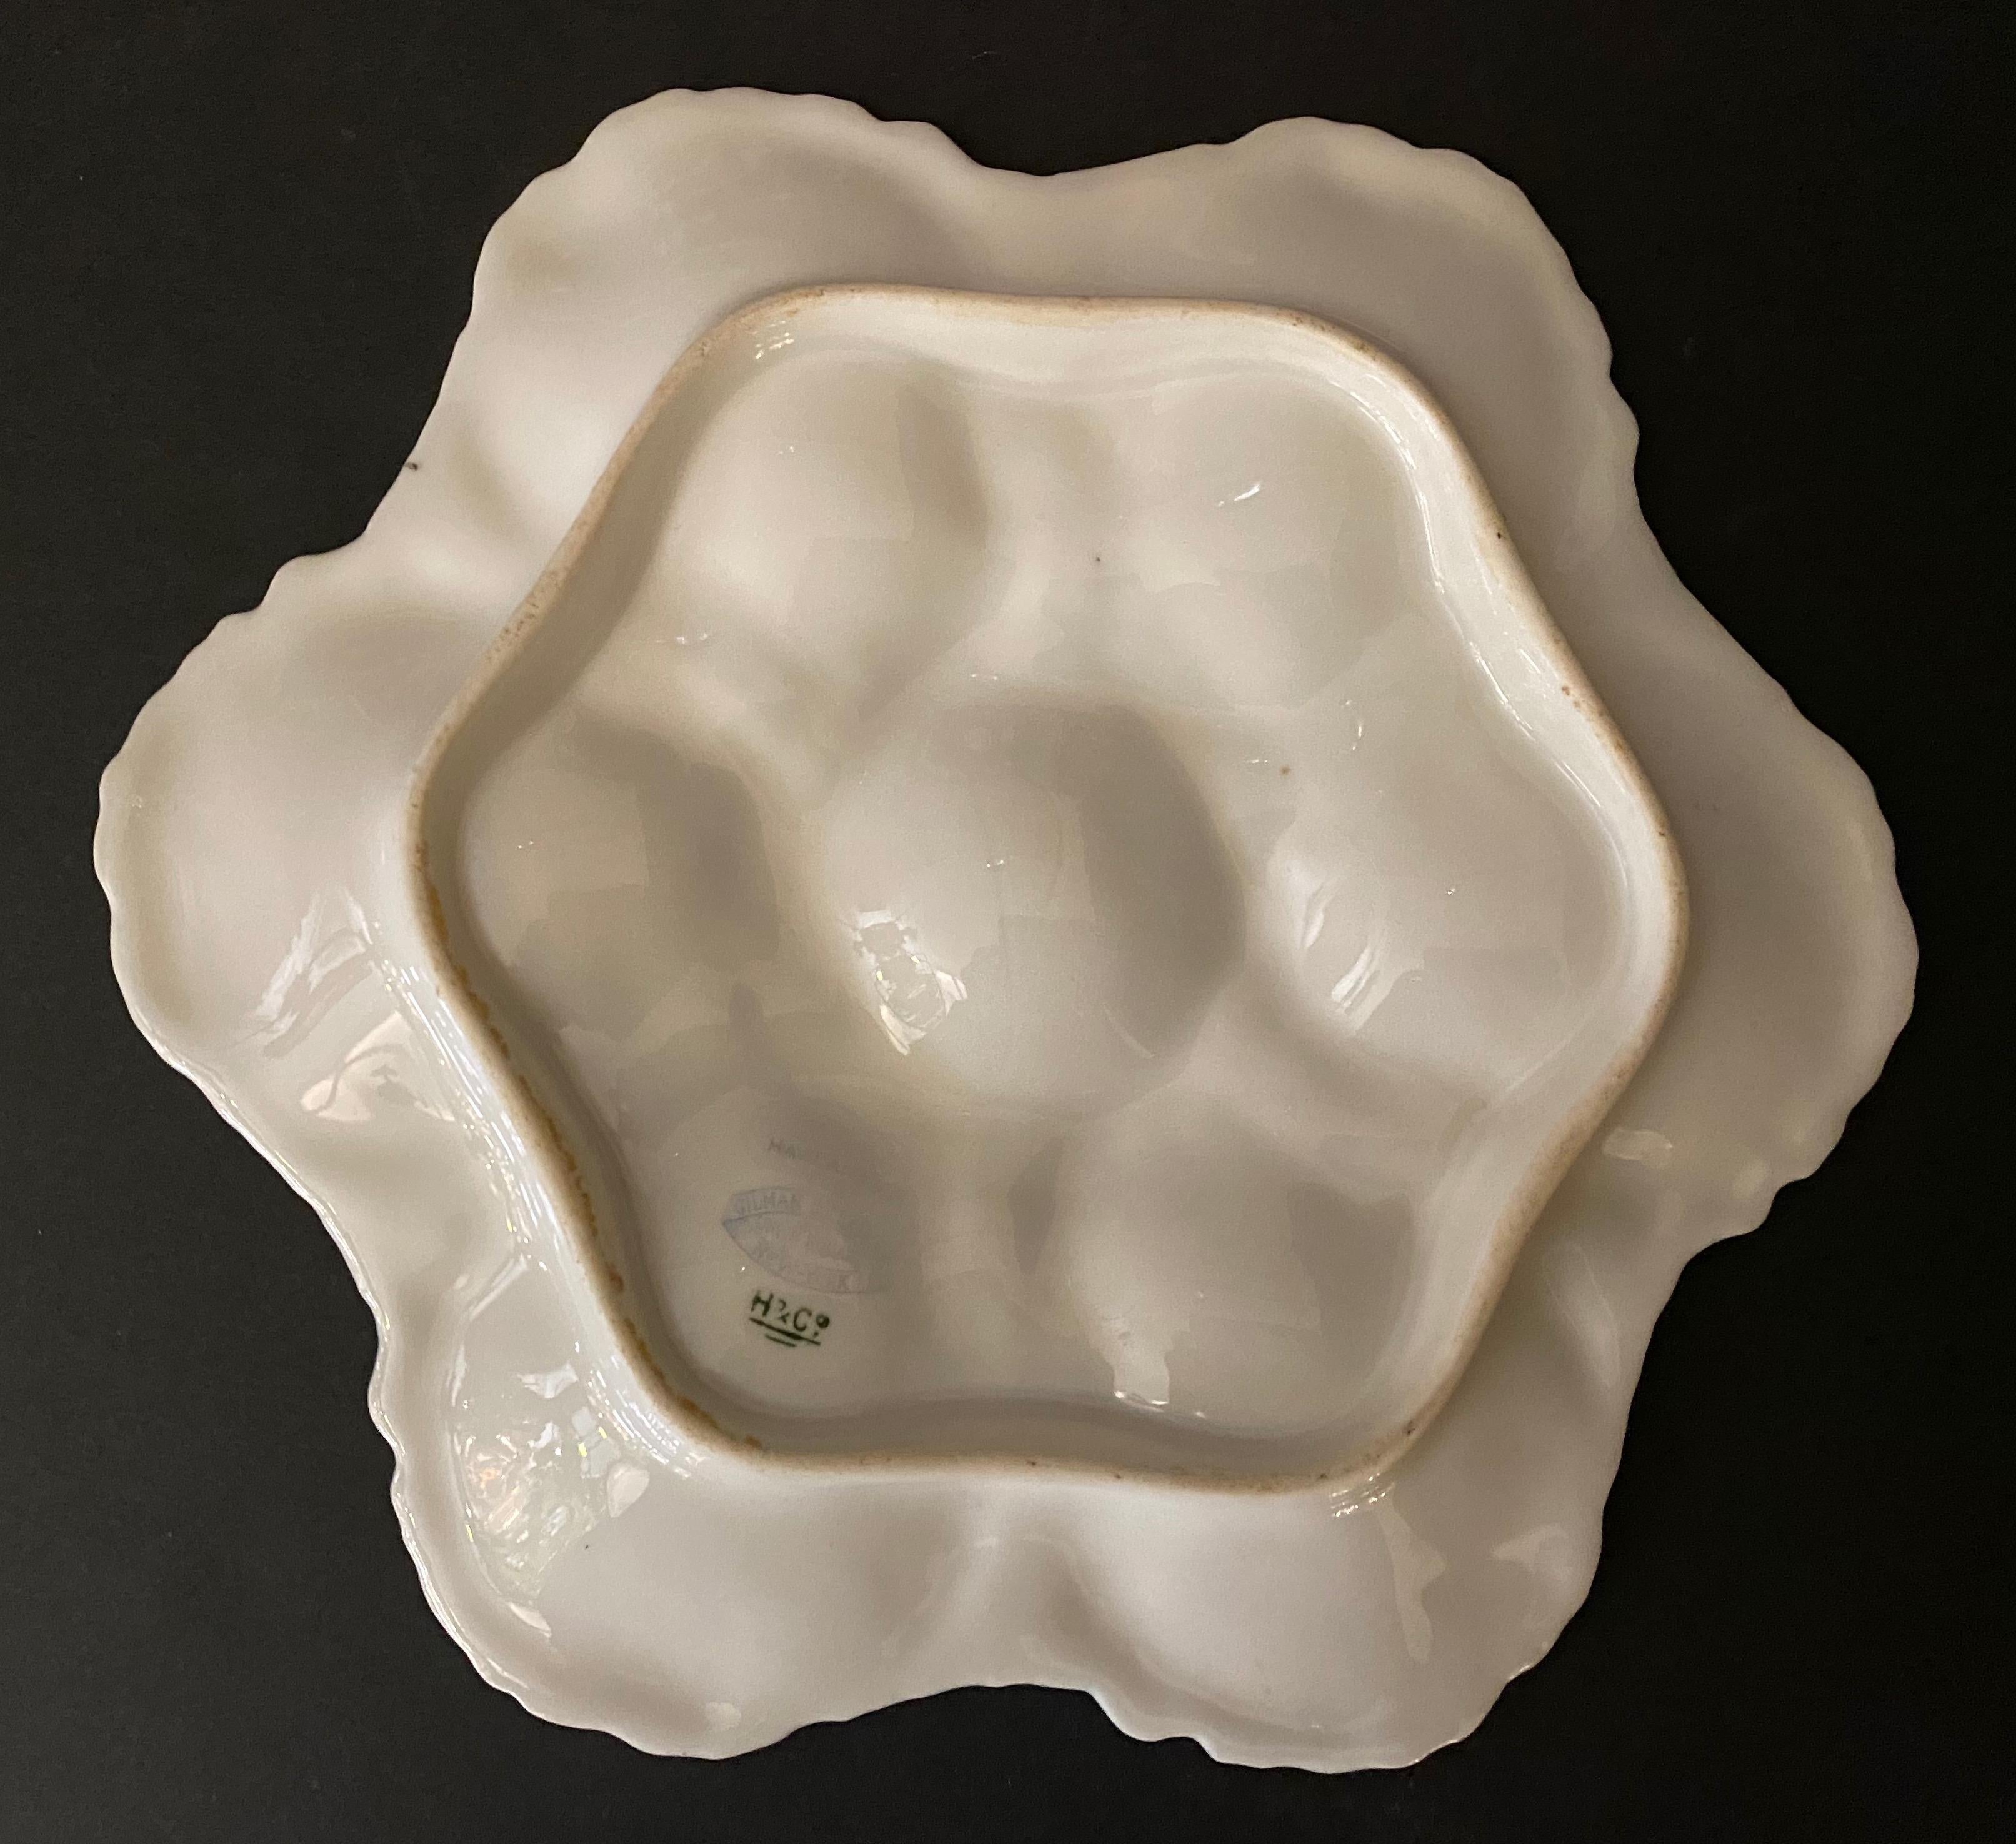 Mid-19th century Limoges porcelain oyster plate

This colorful porcelain oyster plate has 6 cases. The hand painted oyster shells are made with a very detailed relief.
The inside of the oyster shells is decorated in chromolithography with fruits